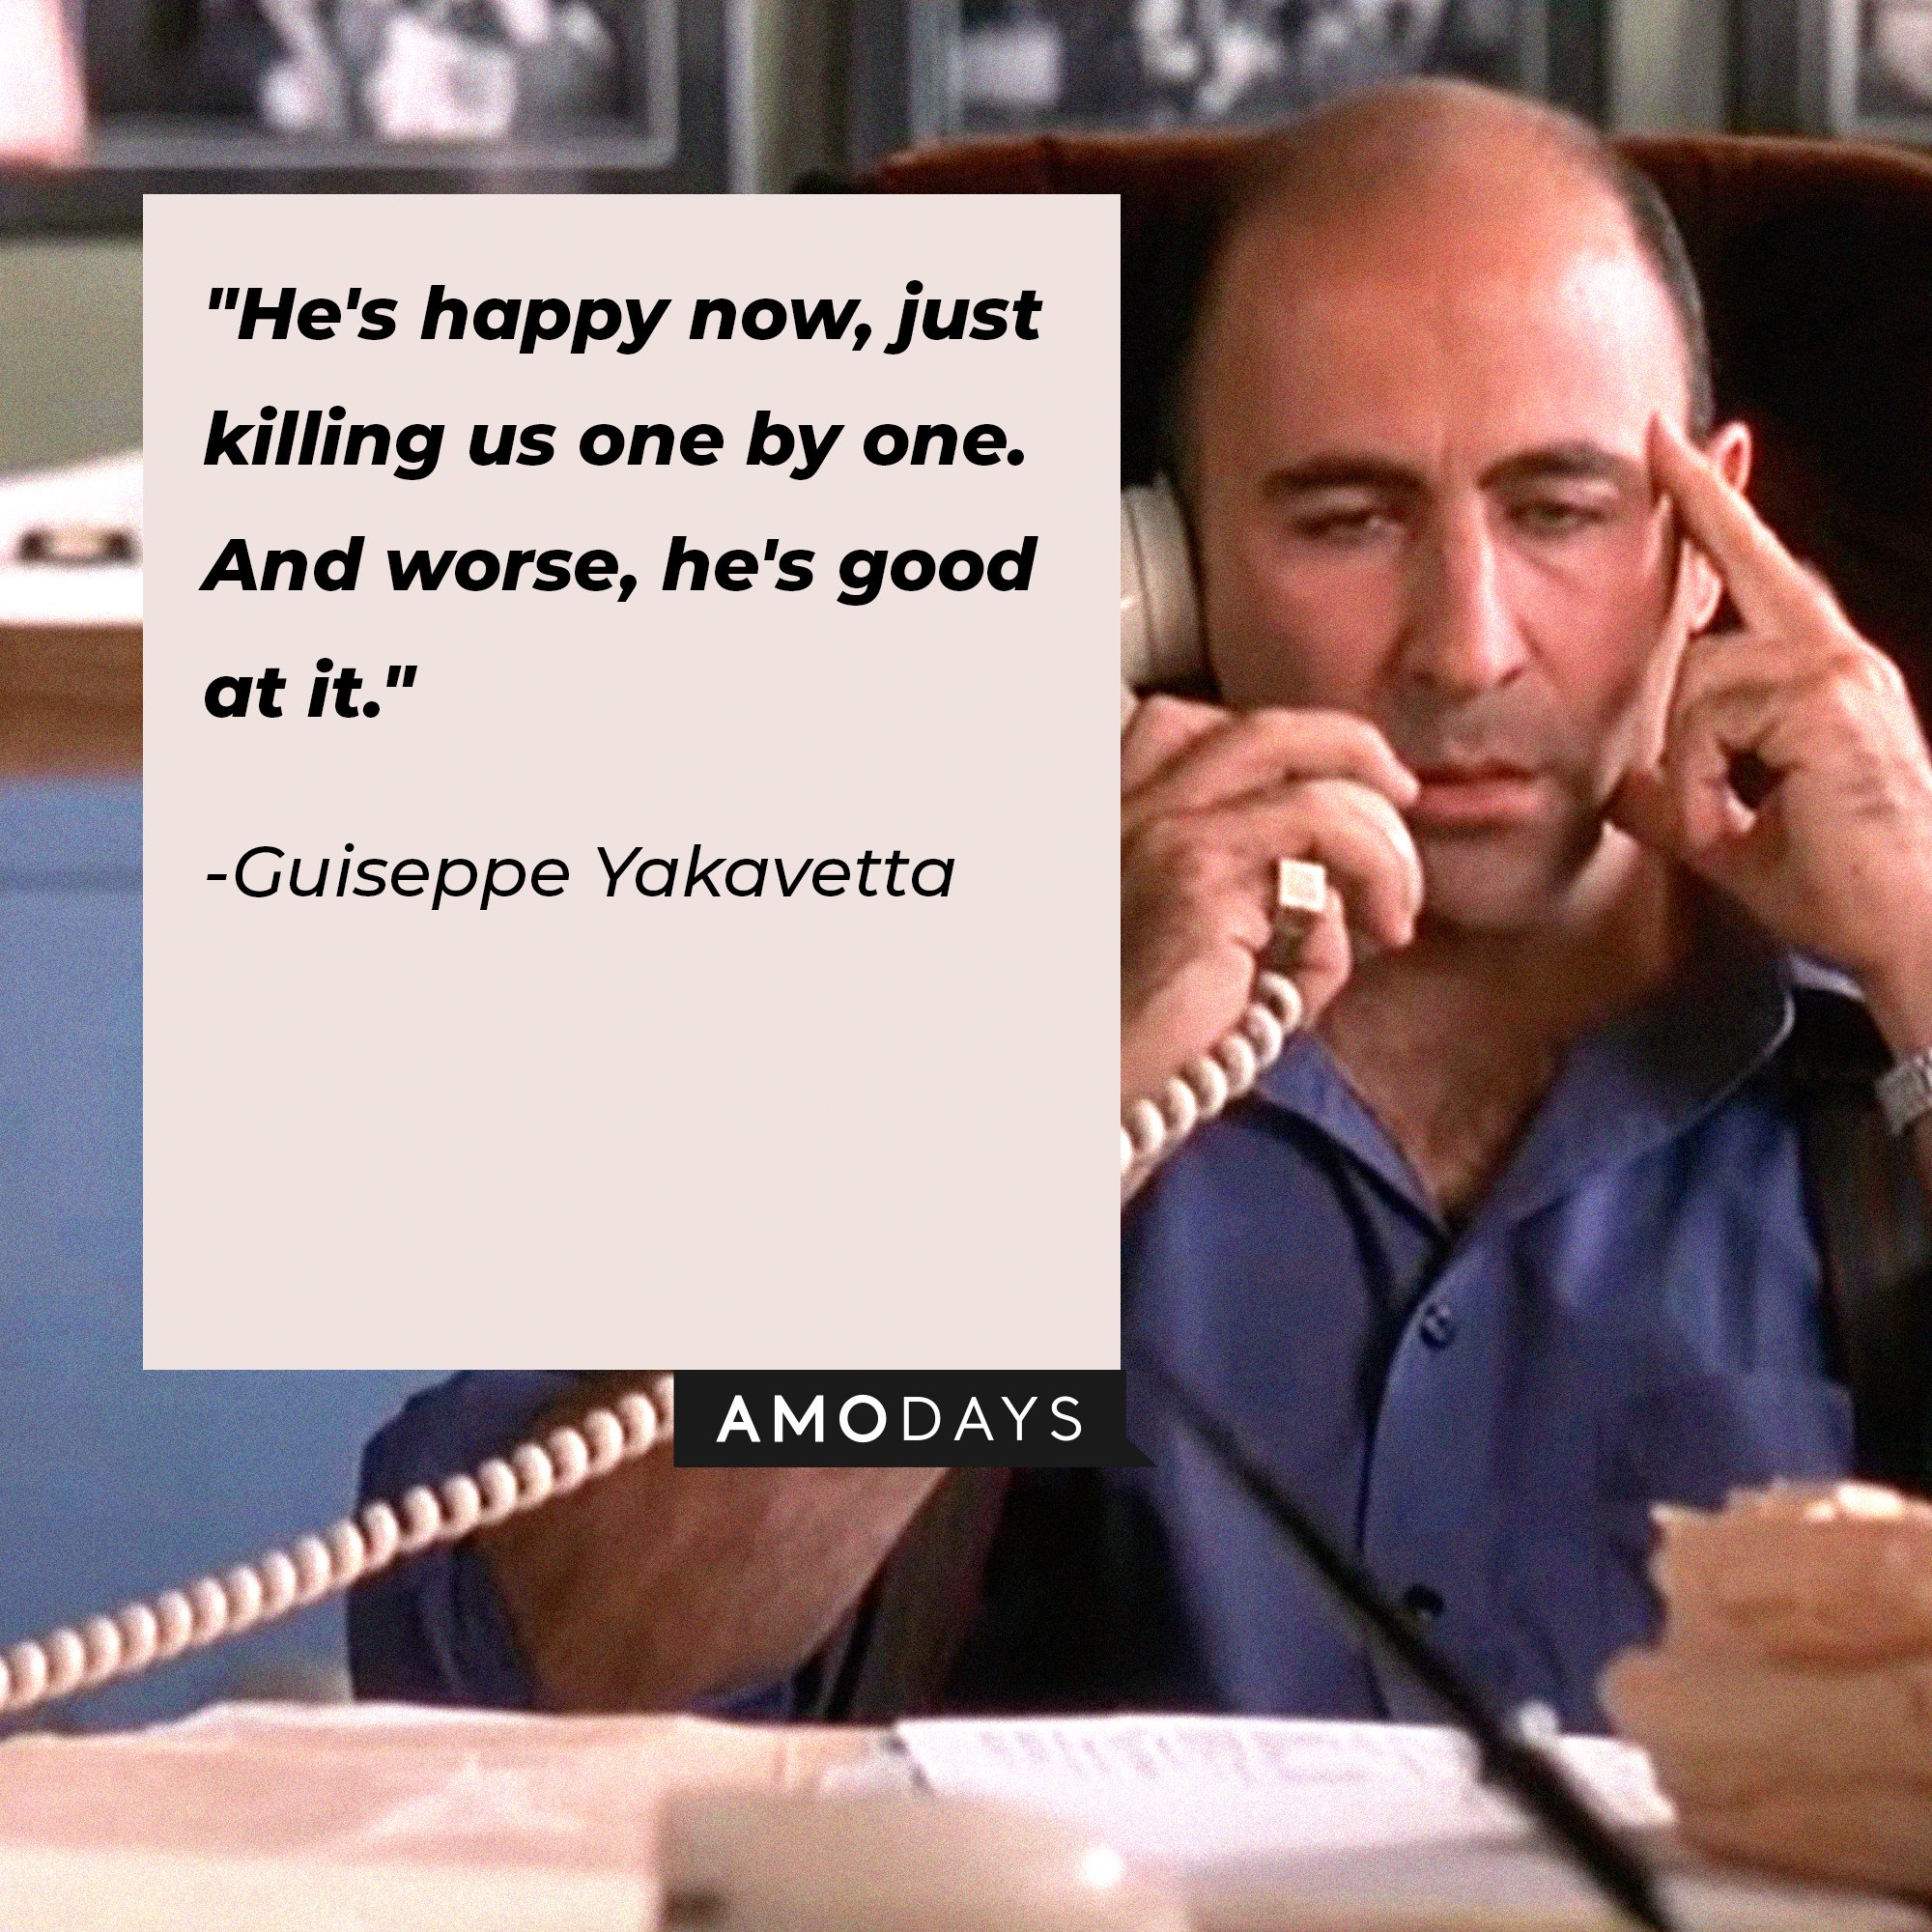  Guiseppe Yakavetta’s quote: "He's happy now, just killing us one by one. And worse, he's good at it." | Image: AmoDays